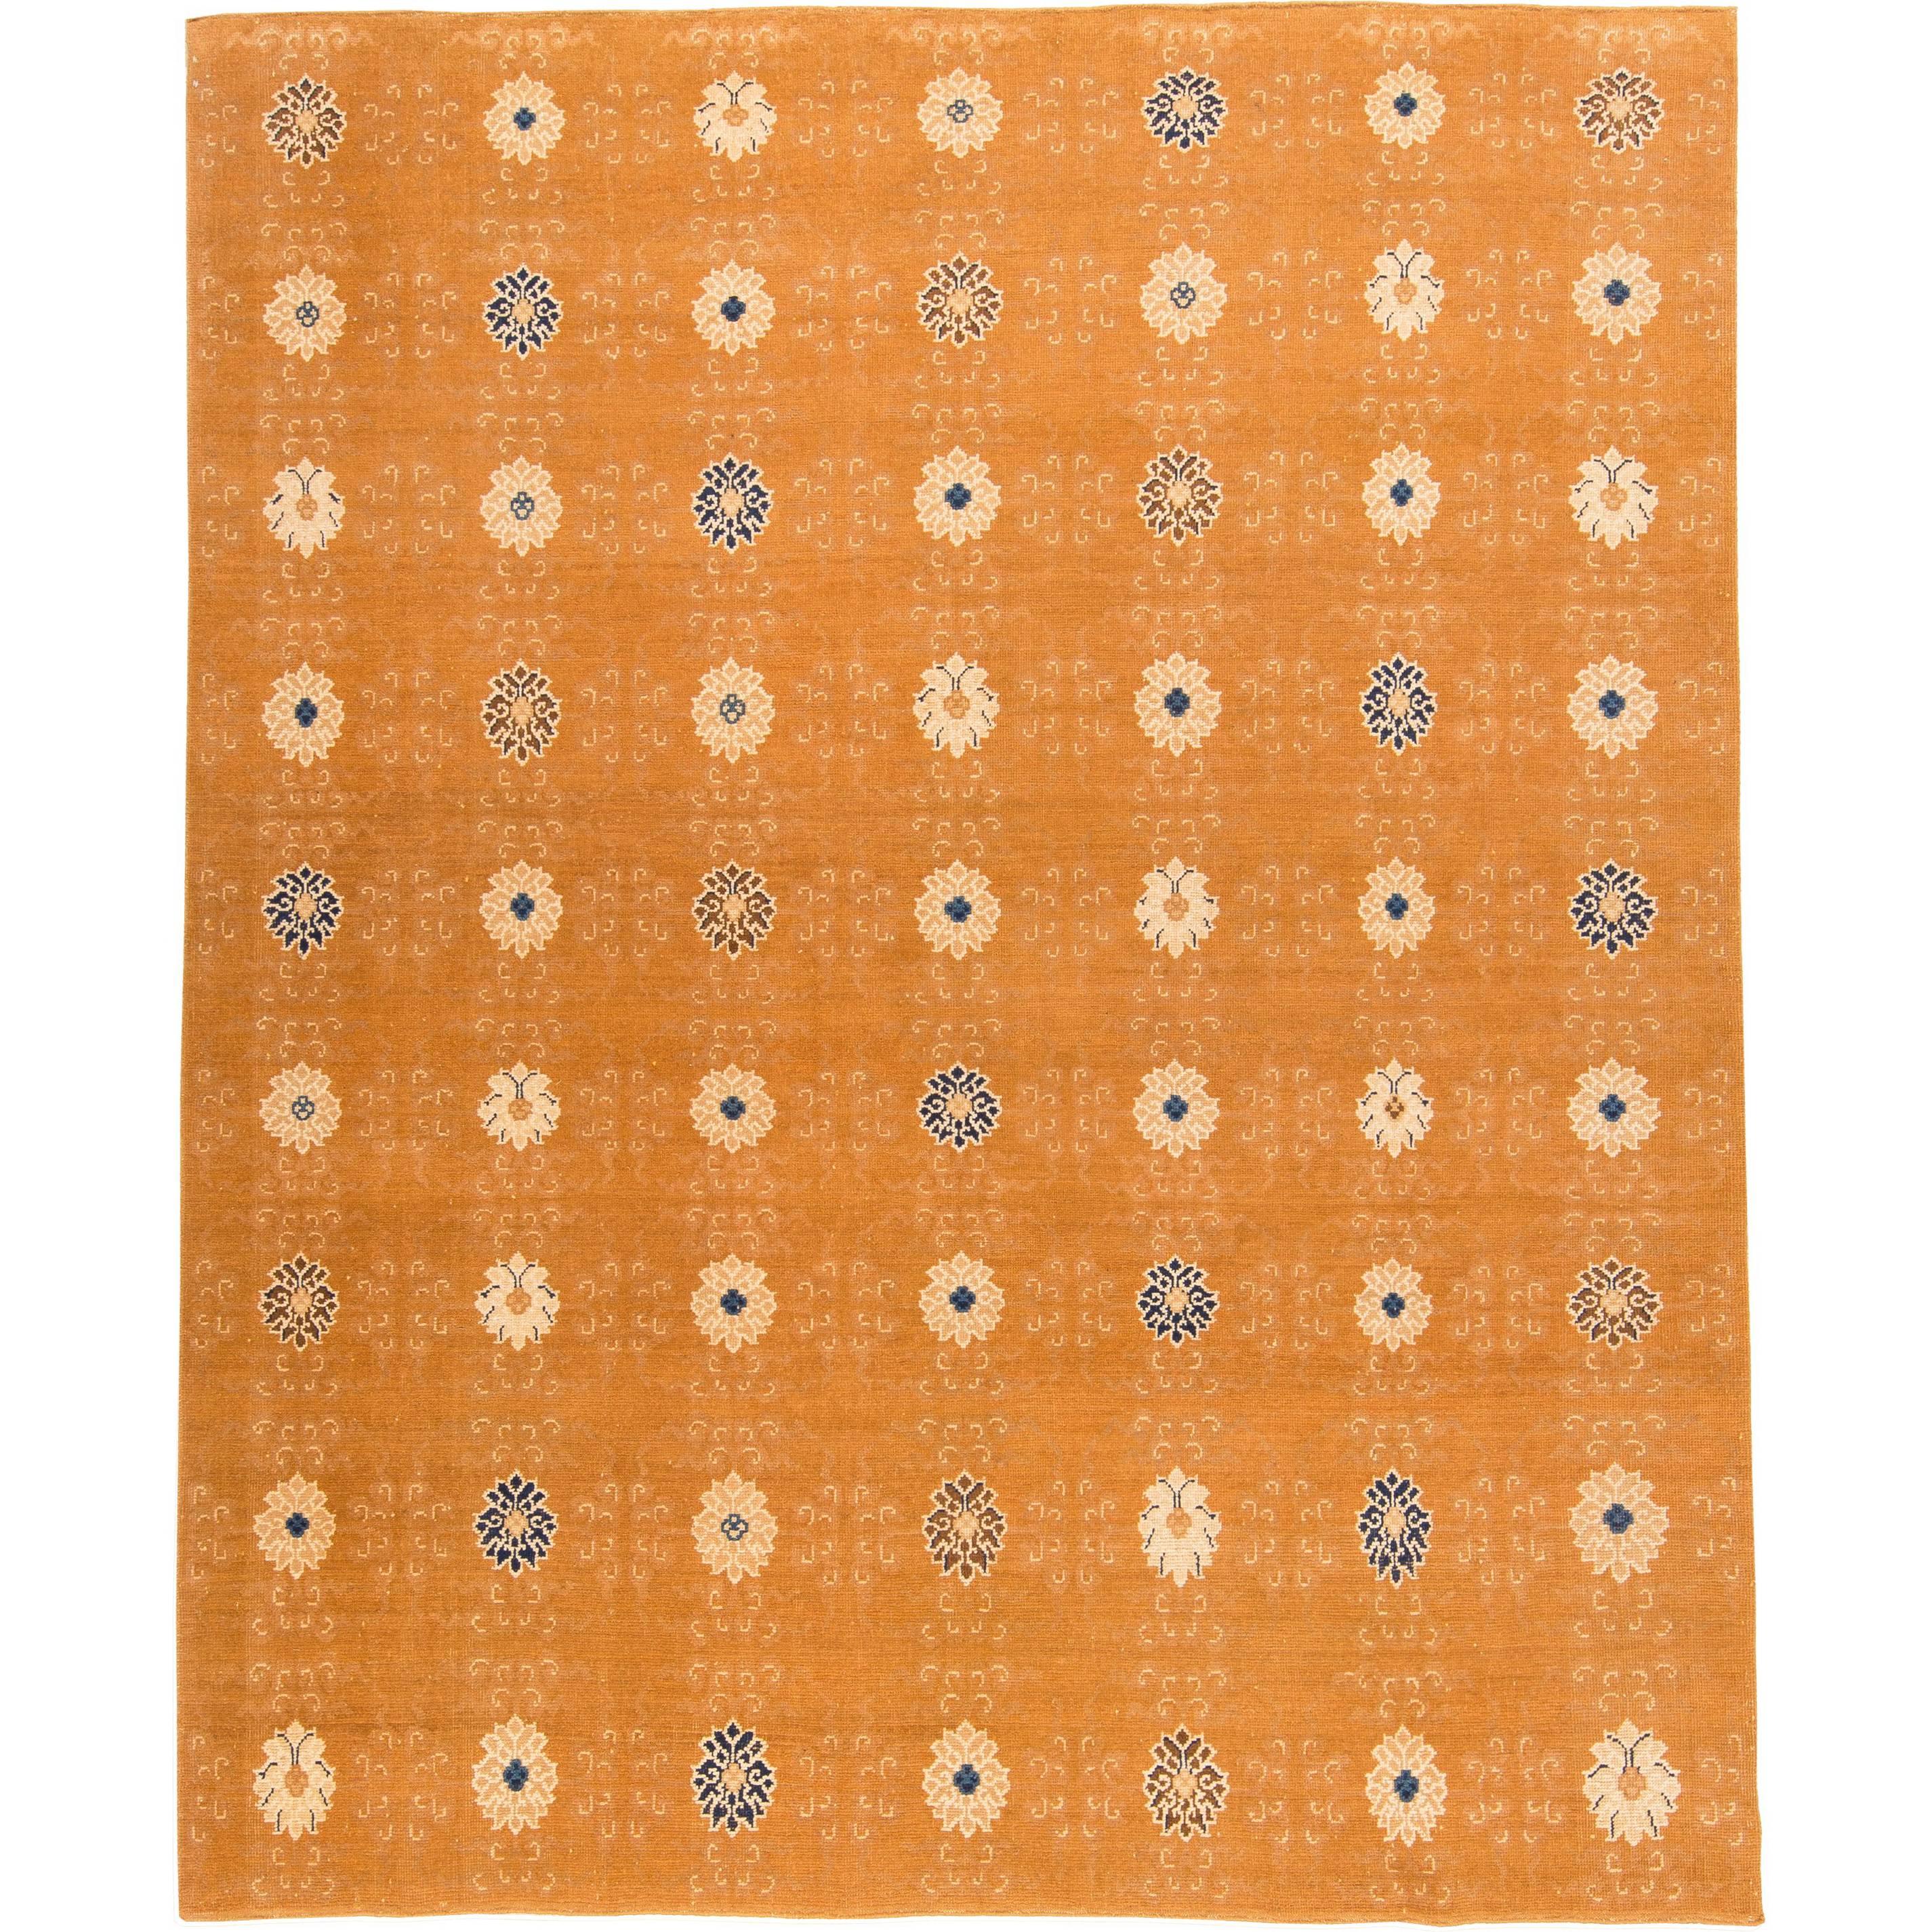 Kooches Padma Rug For Sale